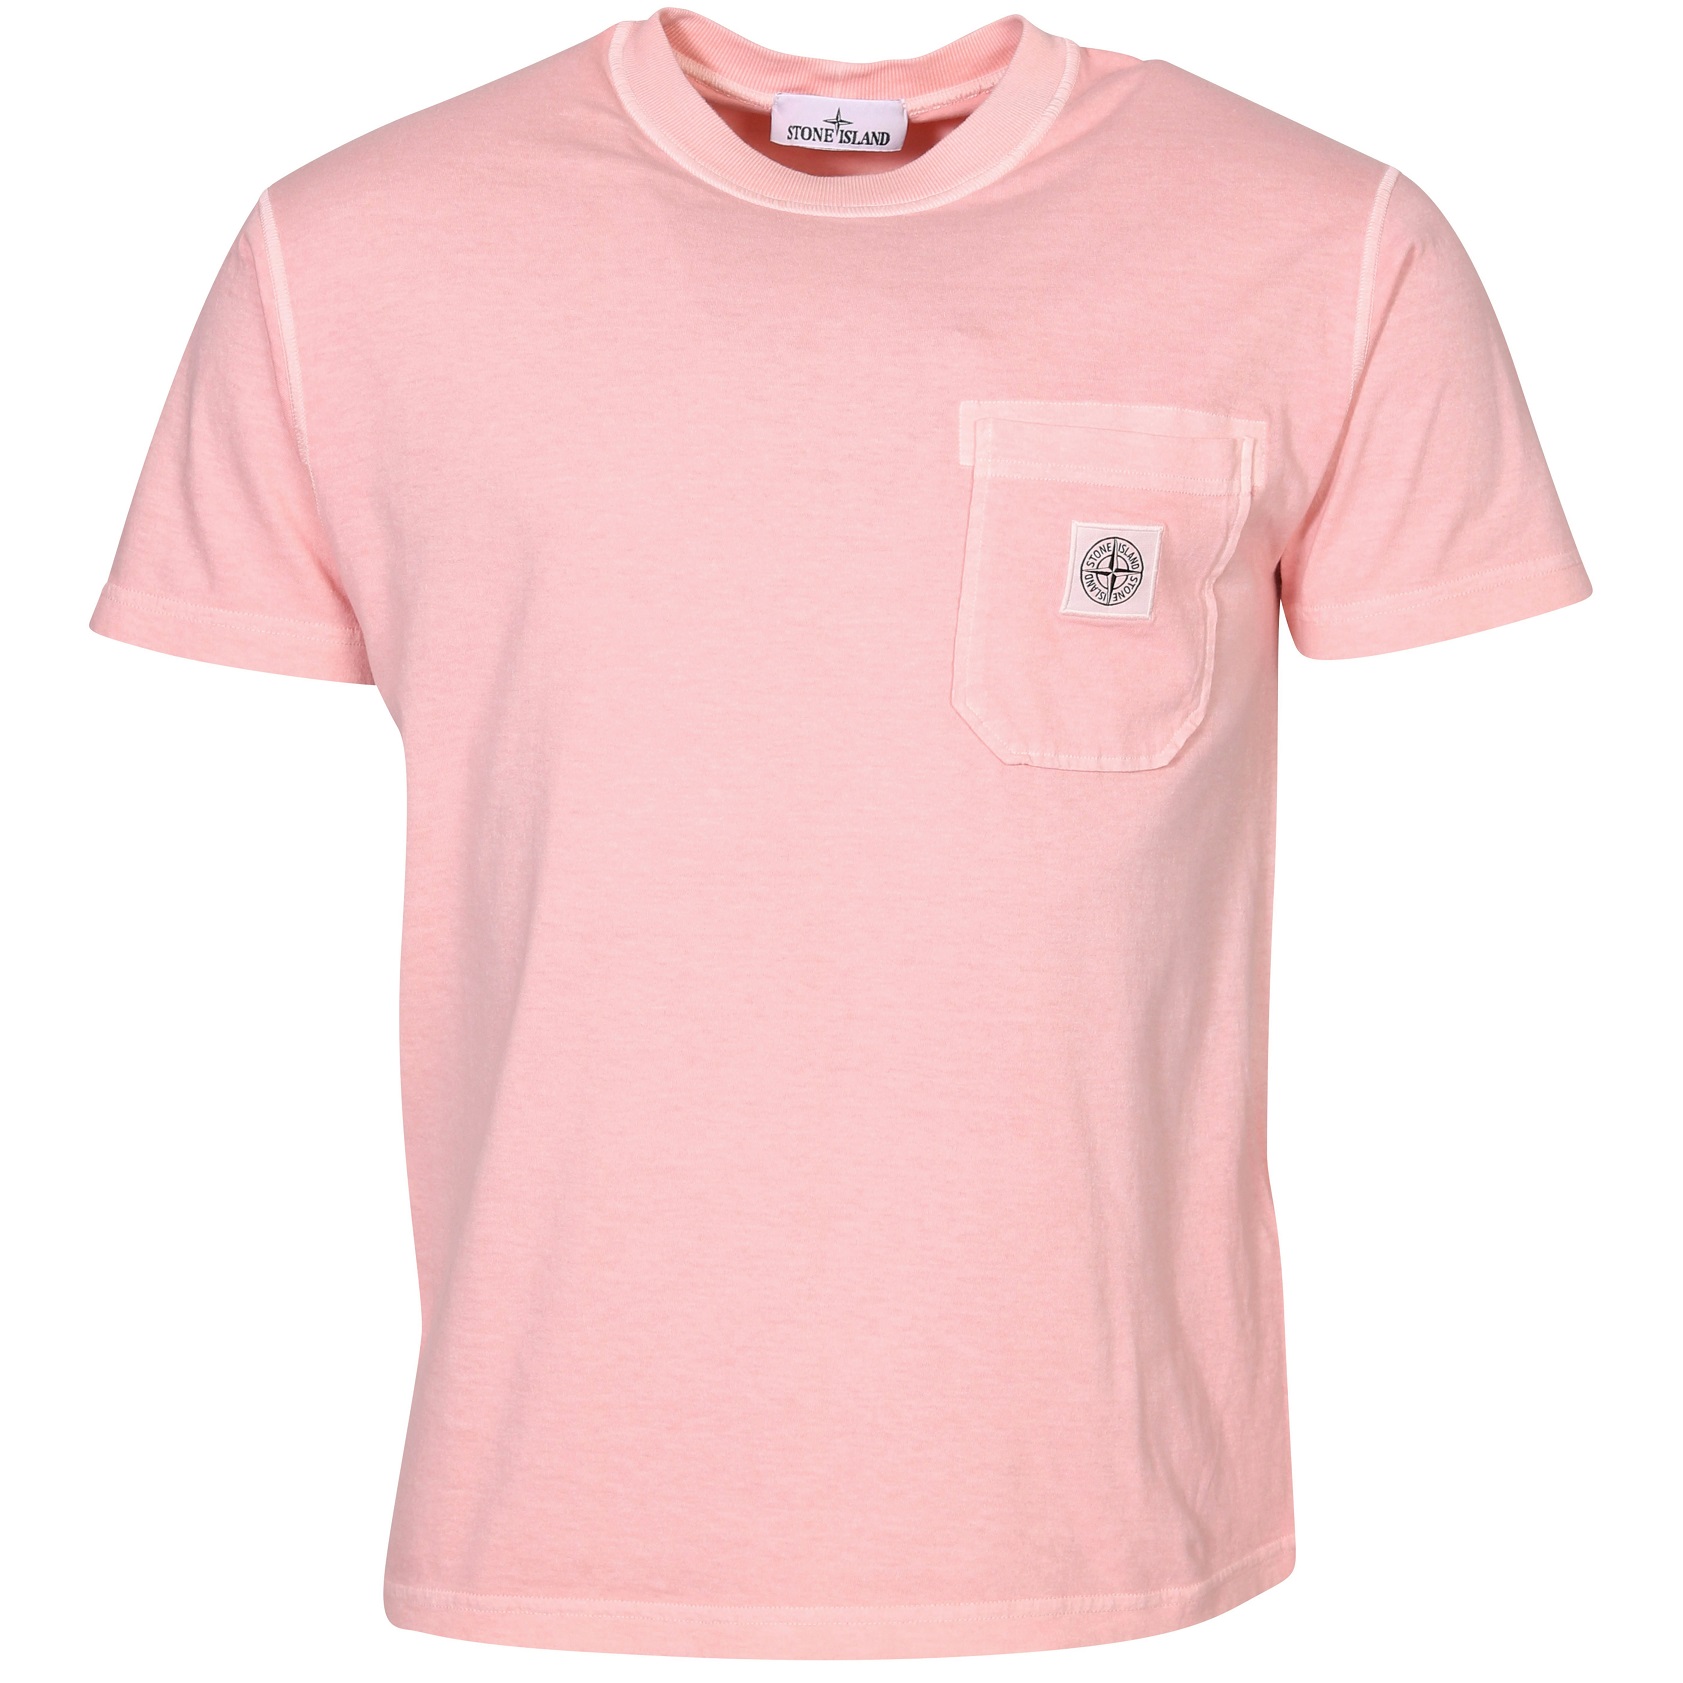 STONE ISLAND Pocket T-Shirt in Washed Pink M